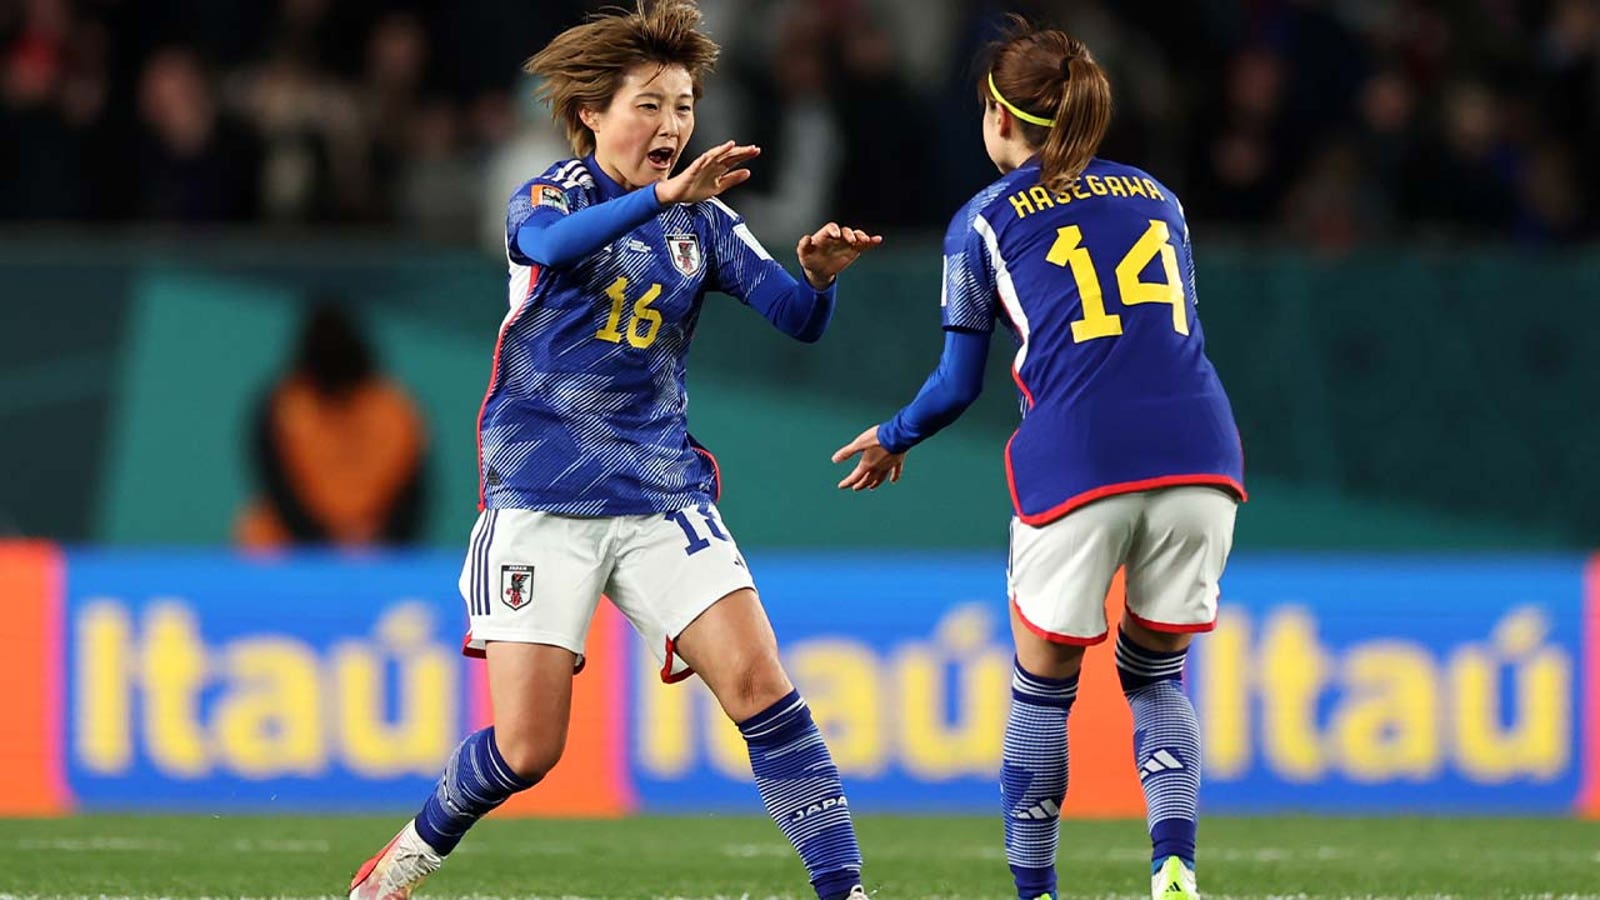 Honoka Hayashi scores a goal against Sweden in the 87th minute